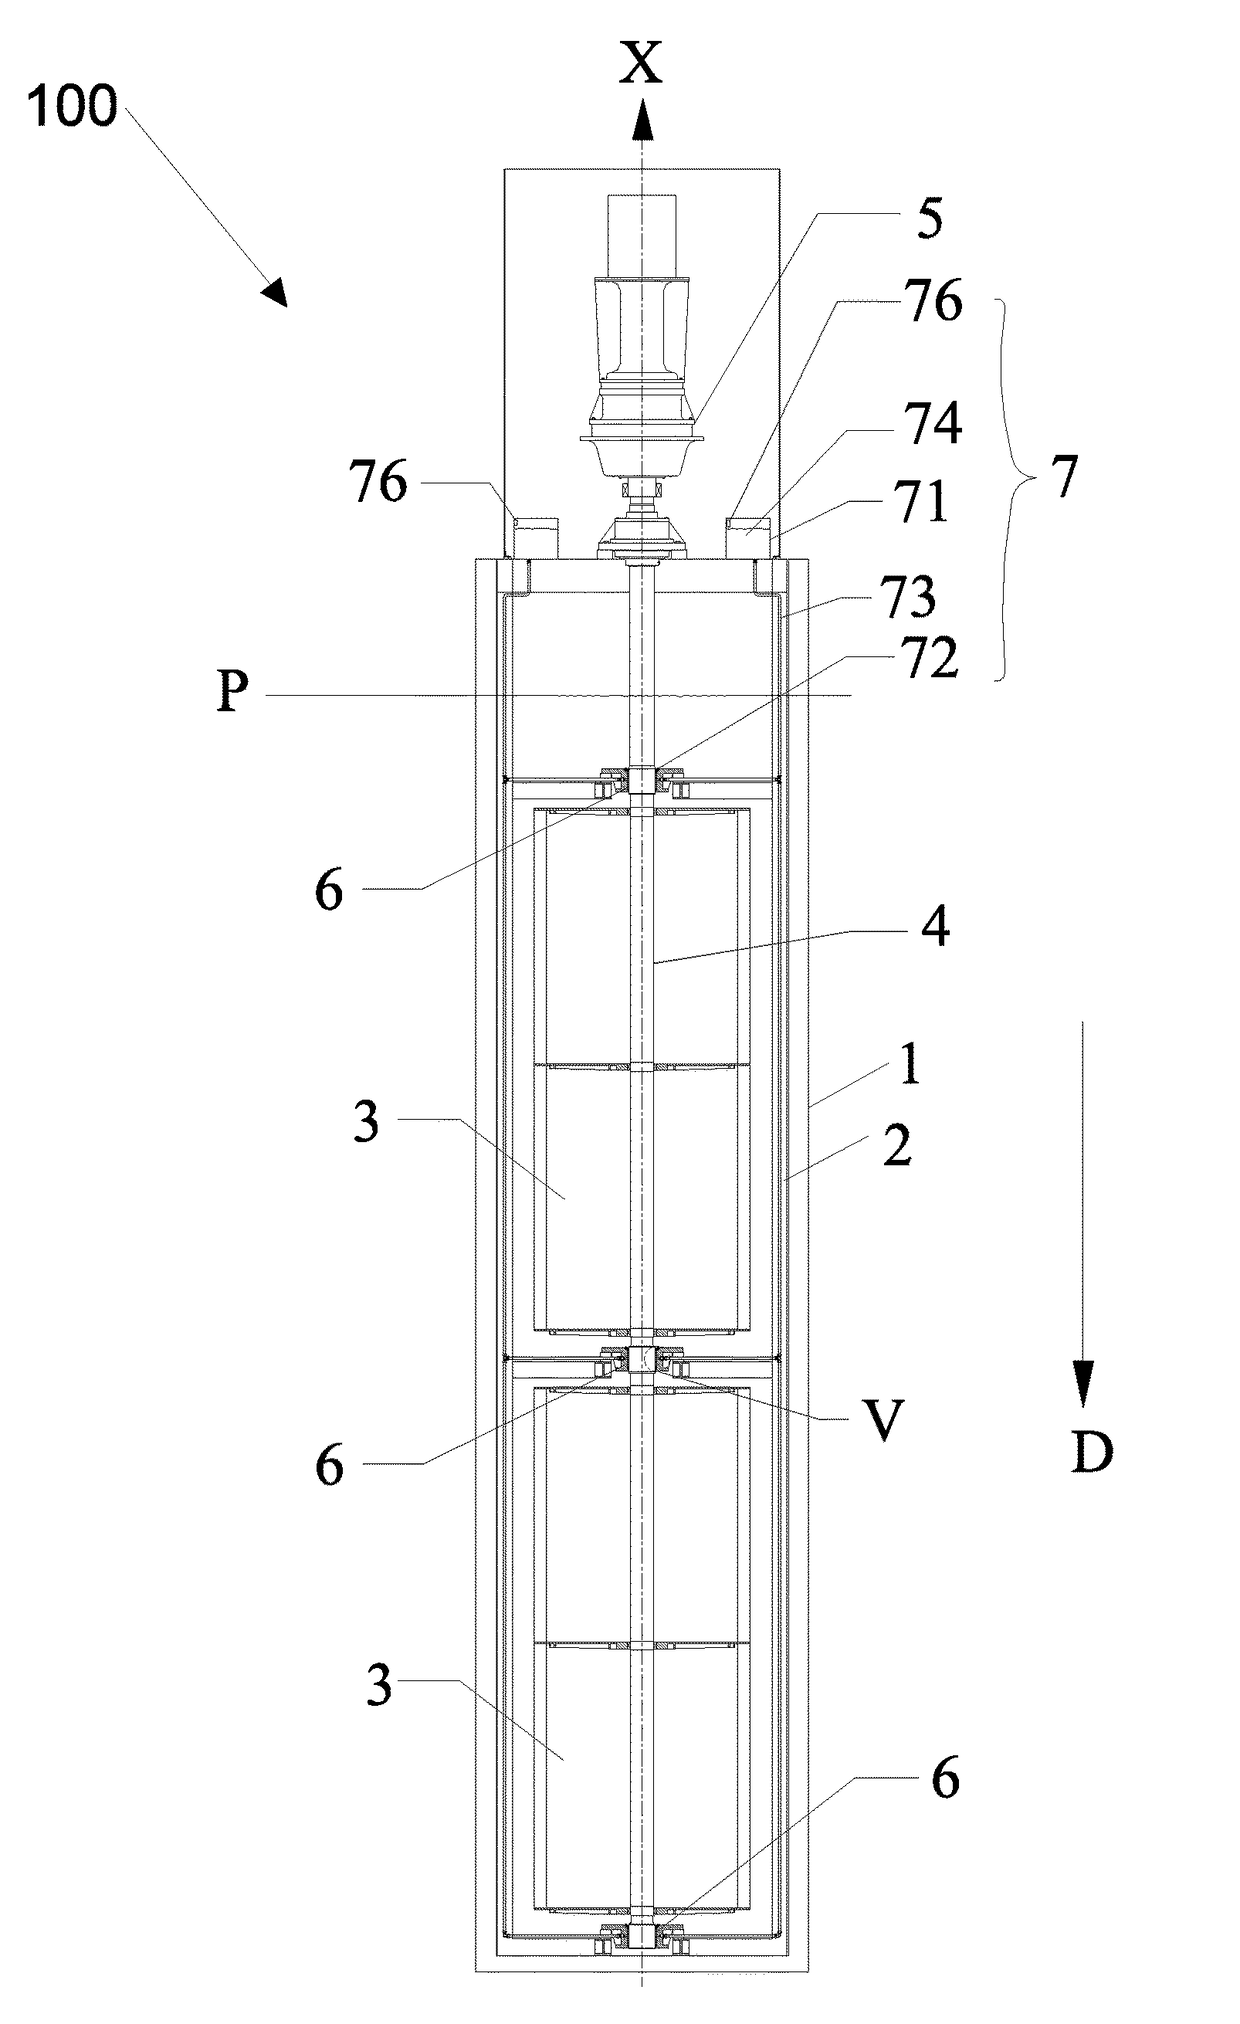 Tidal current energy generating device